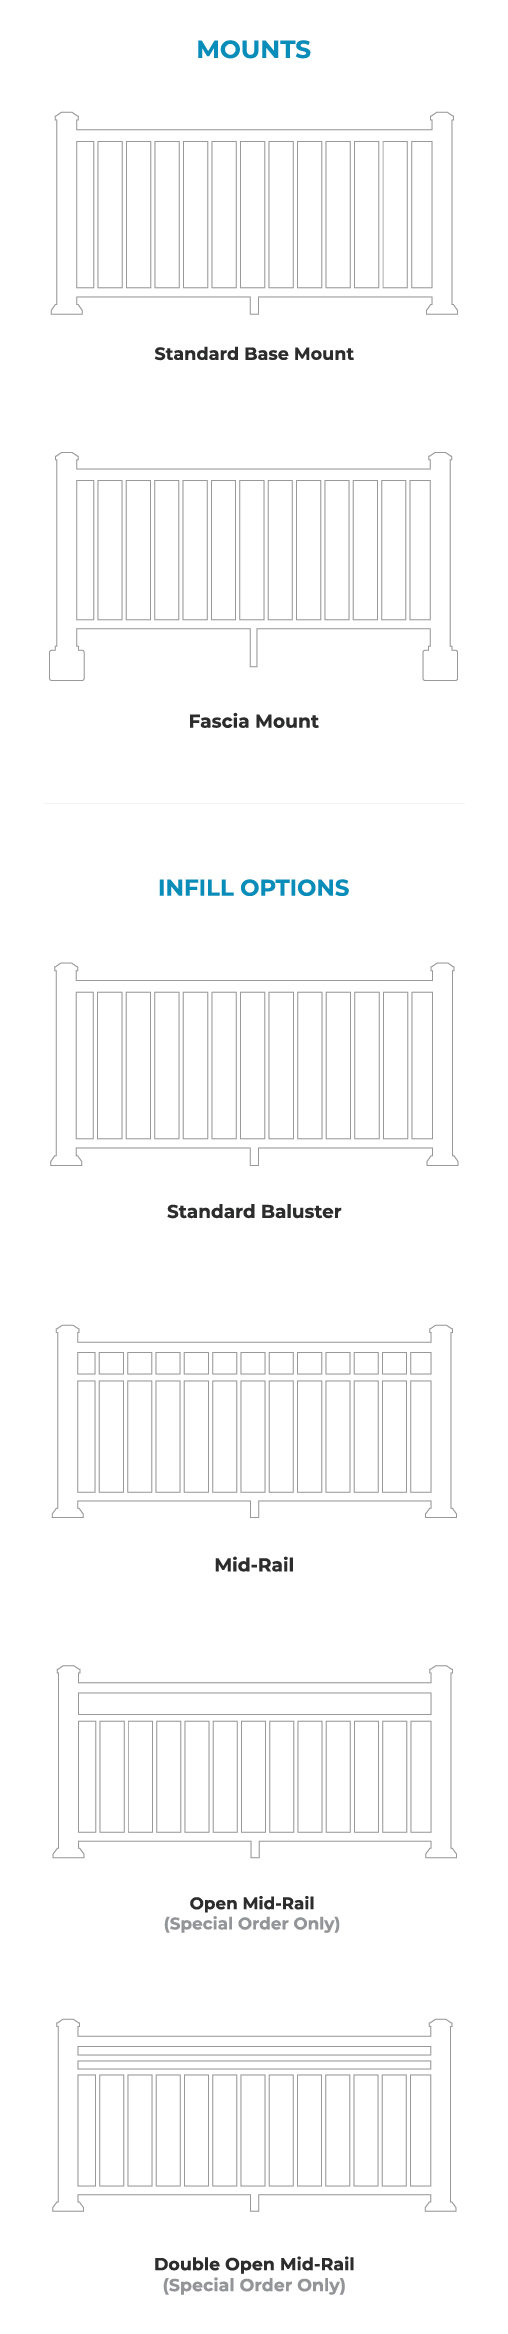 Blaster to Baluster Panel Example